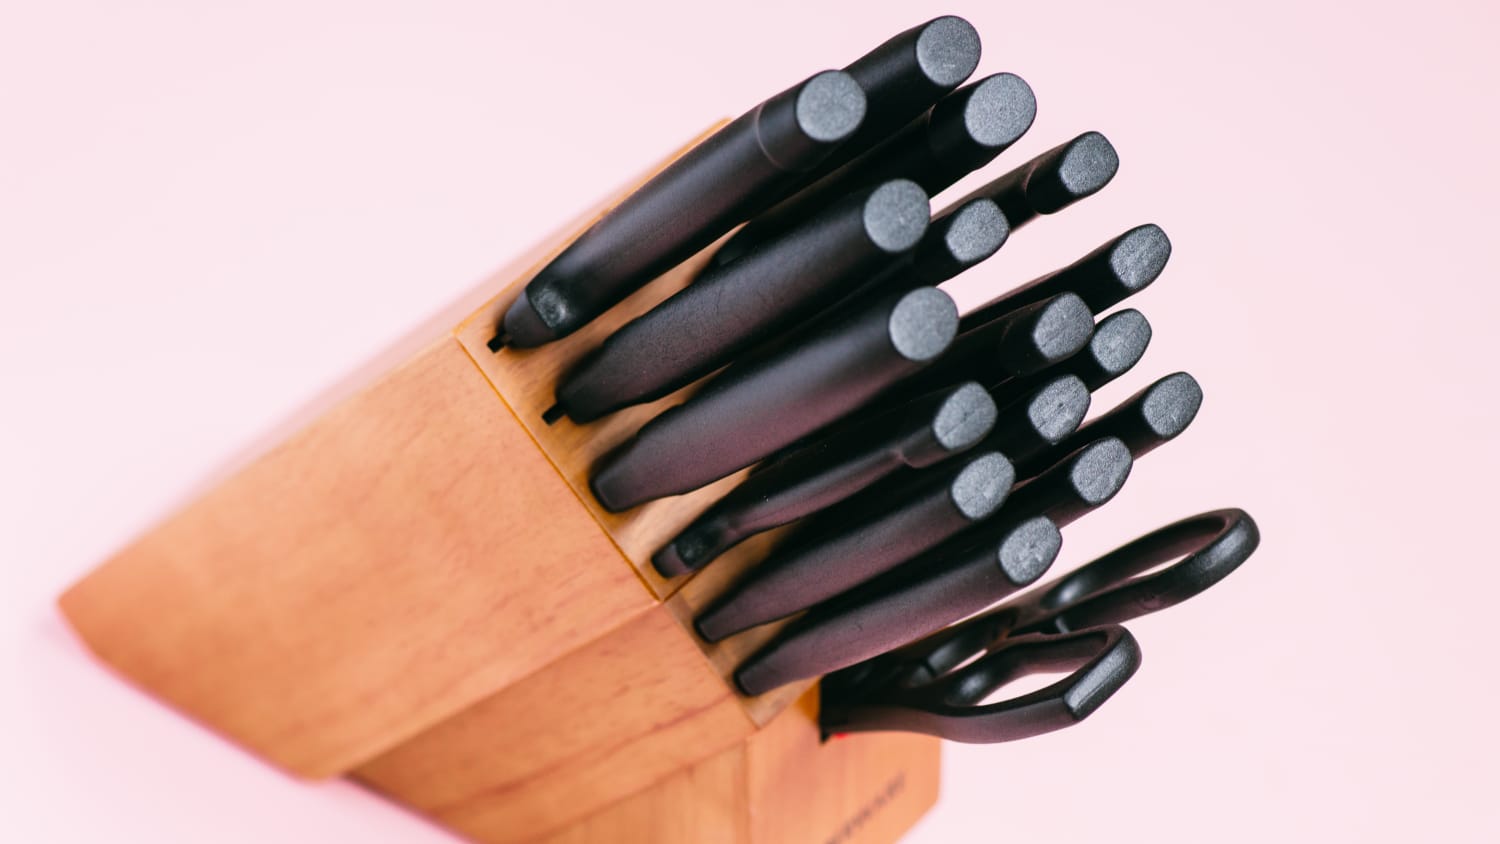 Why Should You Invest in a Knife Block Set?